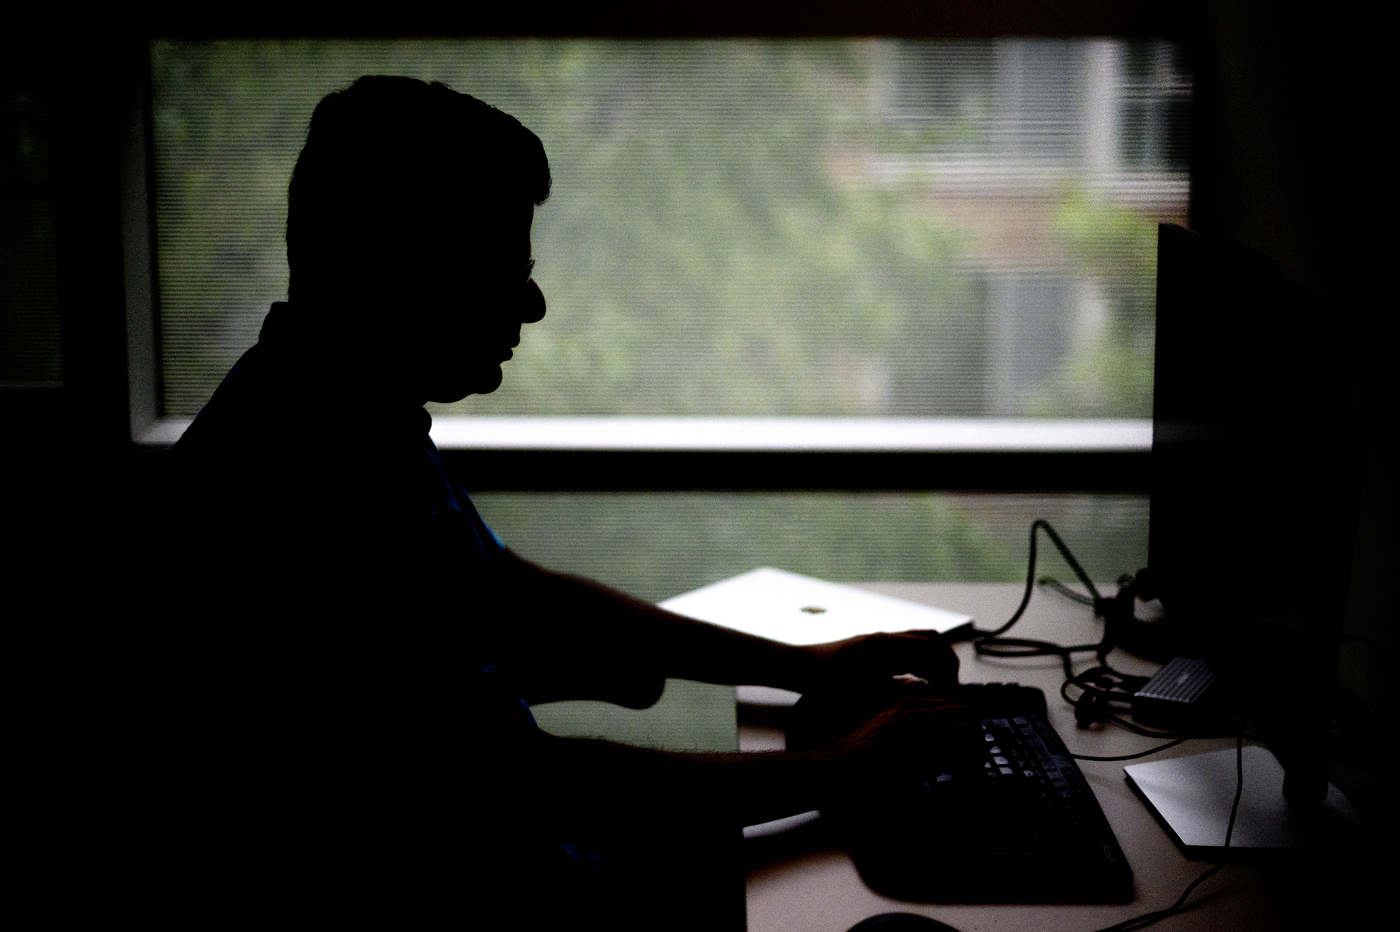 A silhouette of a person sitting in front of a computer.